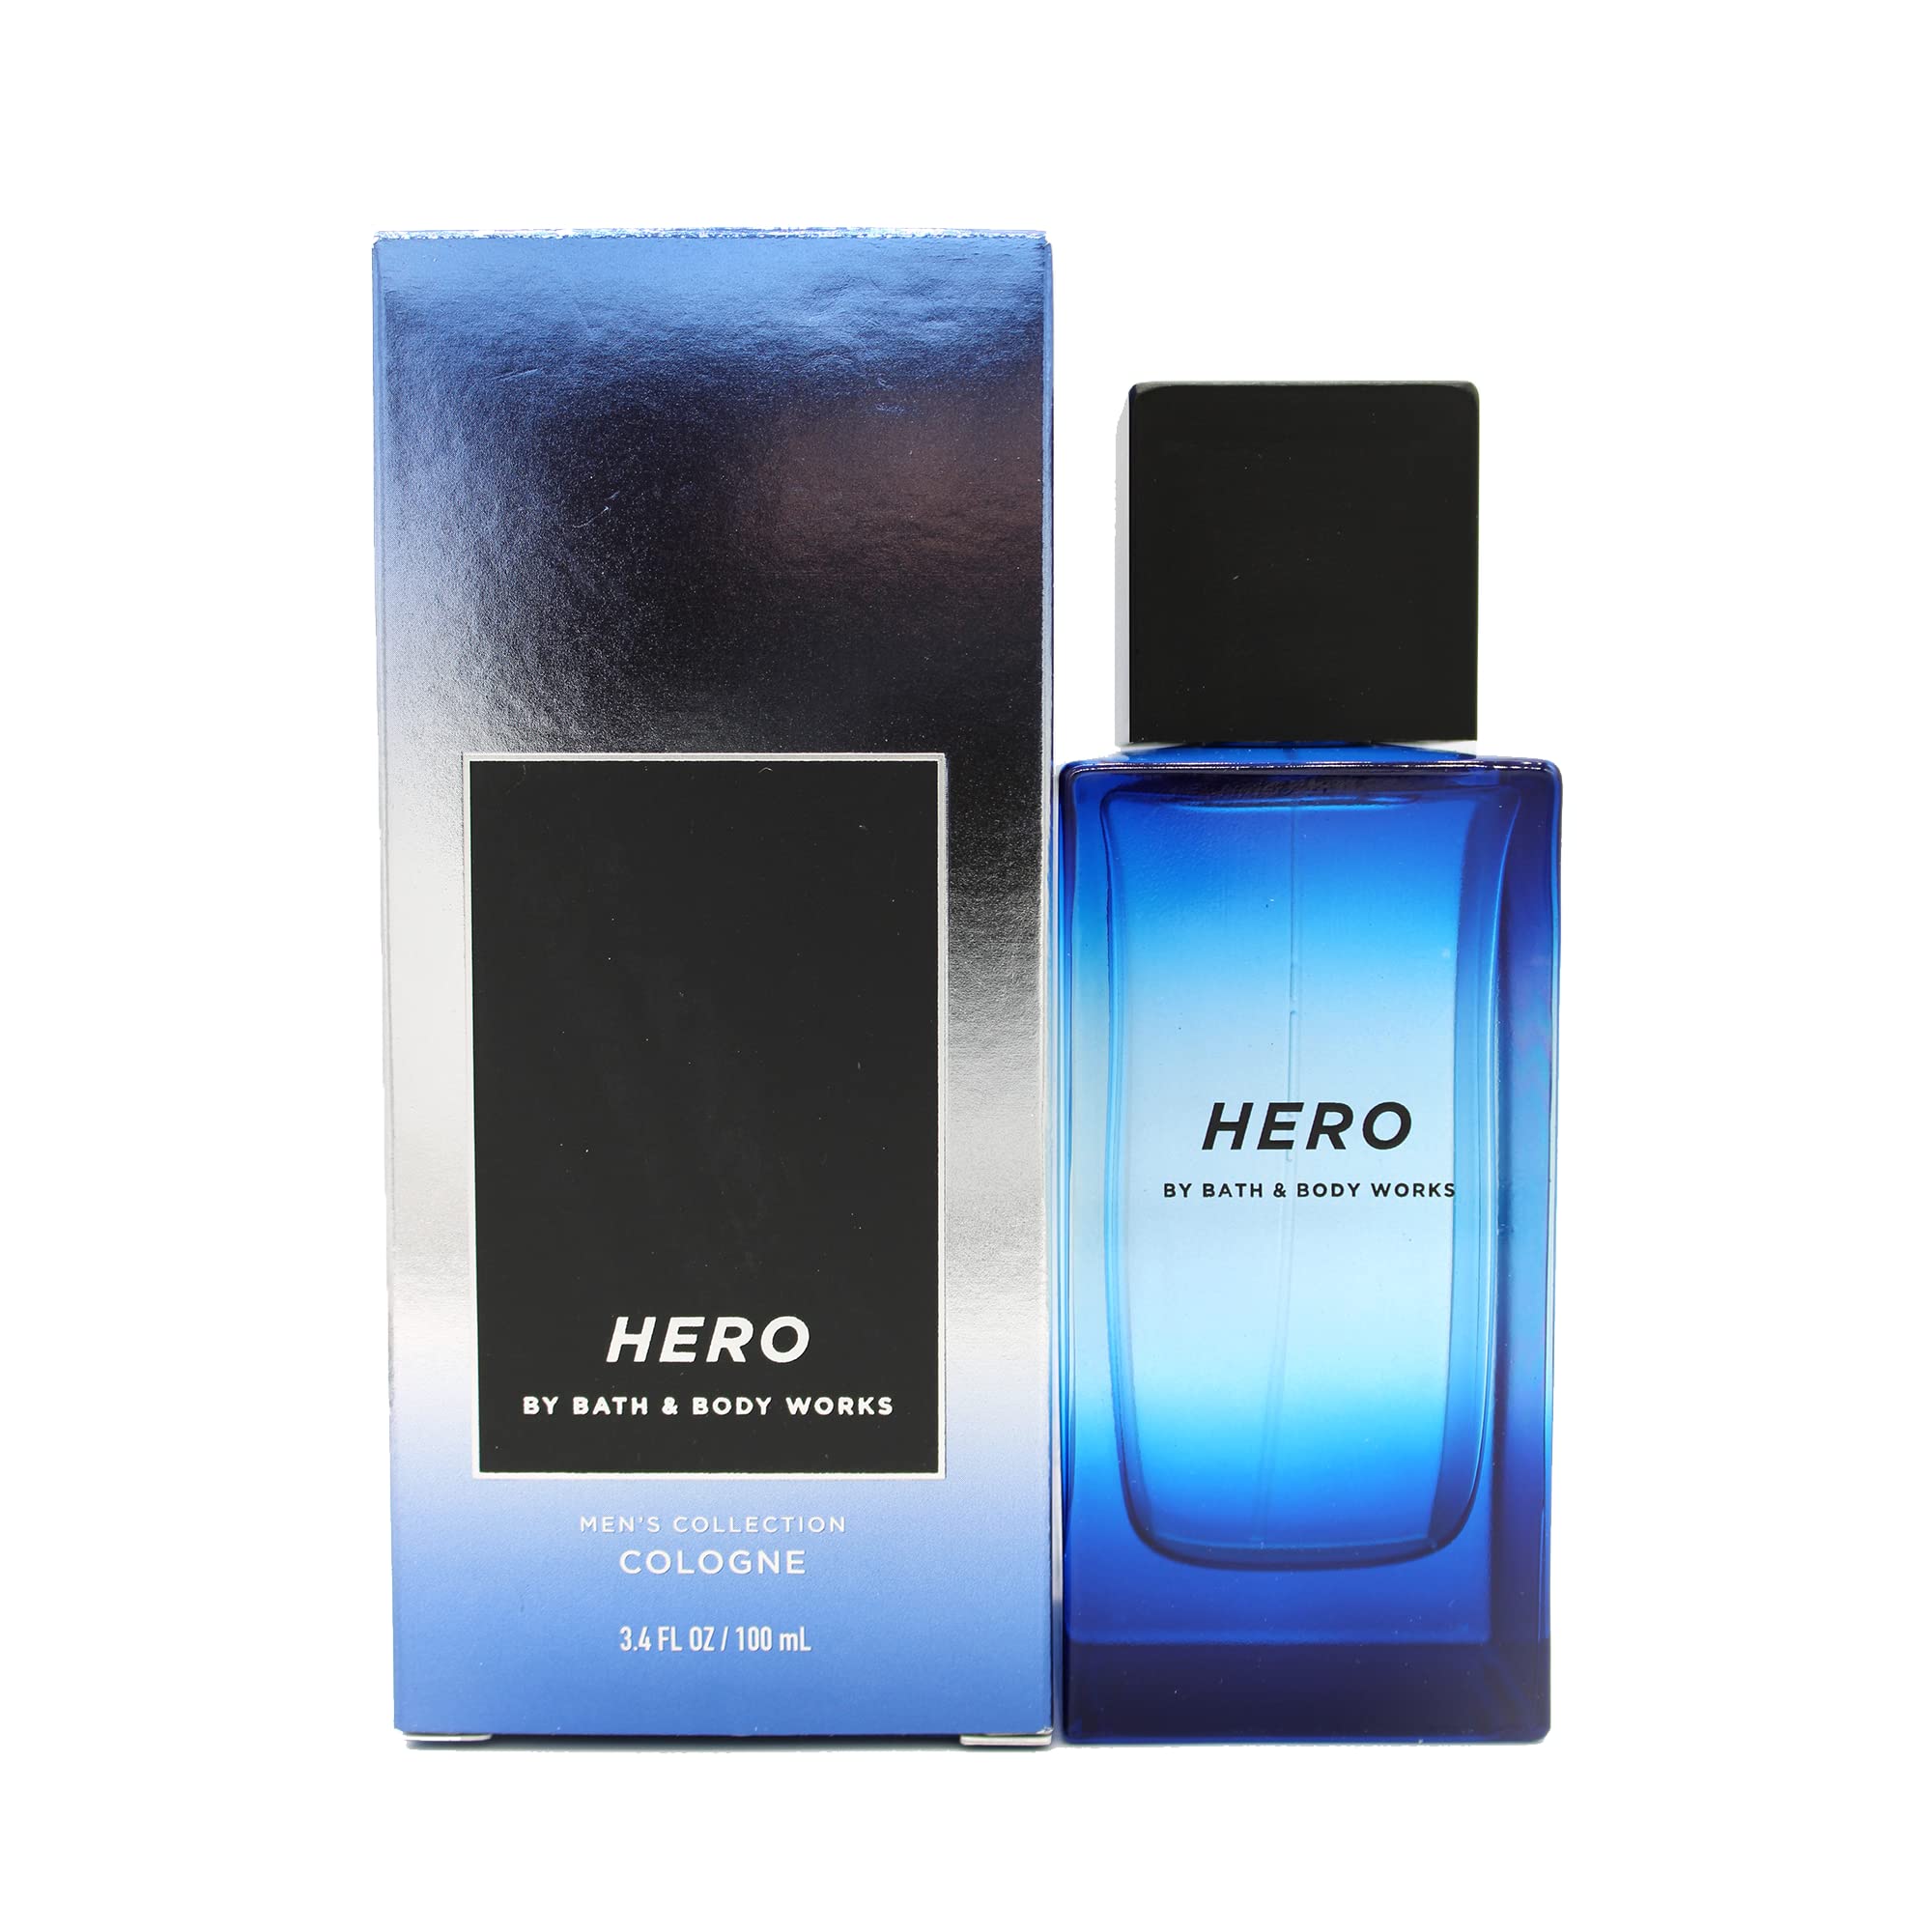 BBW - Bath and Body - Hero Men's Collection Cologne 3.4fl oz / 180ml (Pack of 1)